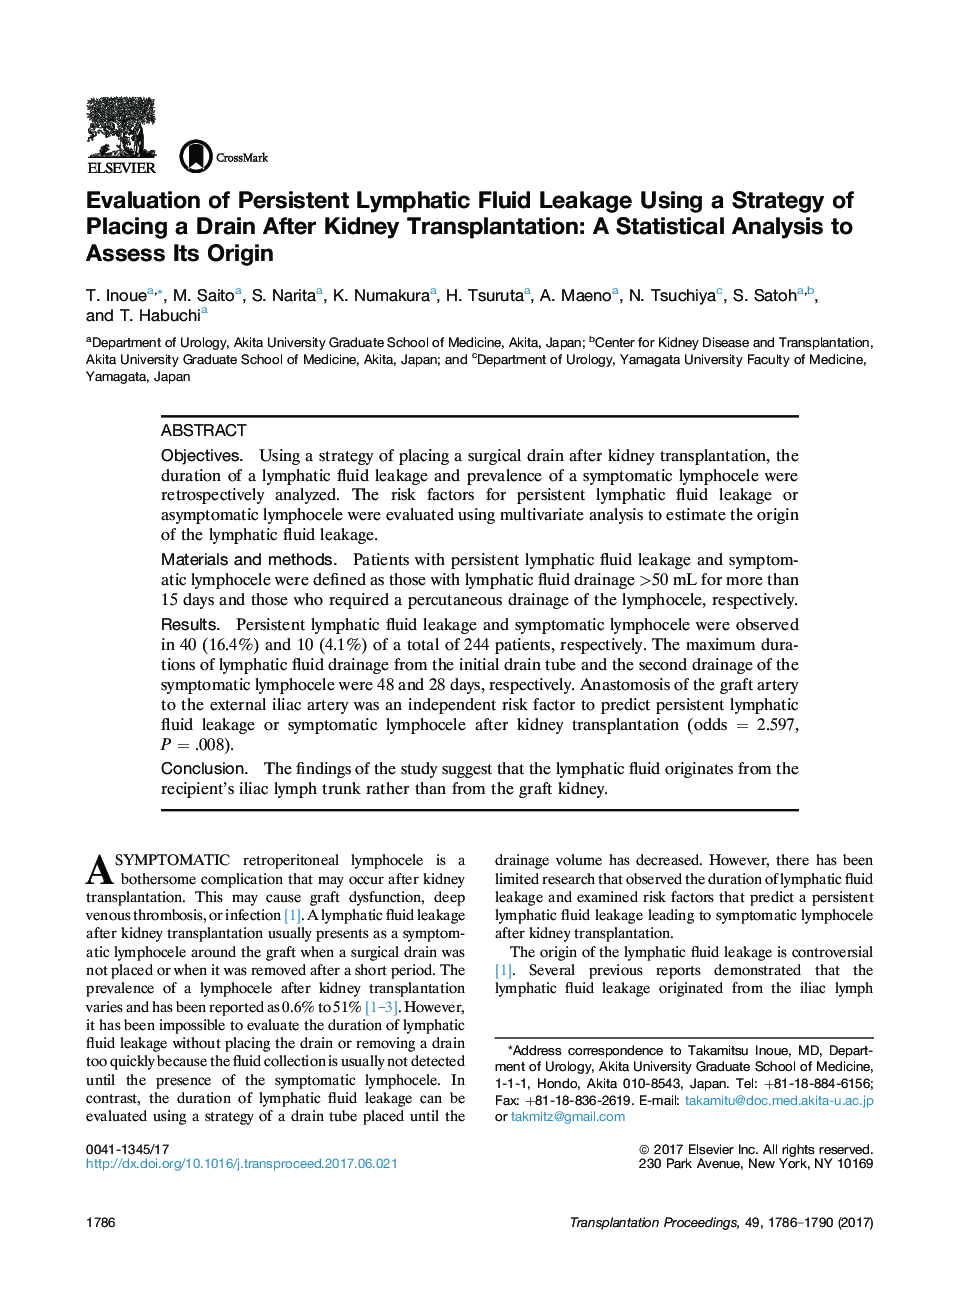 New Approaches in TransplantationKidney transplantationEvaluation of Persistent Lymphatic Fluid Leakage Using a Strategy of Placing a Drain After Kidney Transplantation: A Statistical Analysis to Assess Its Origin